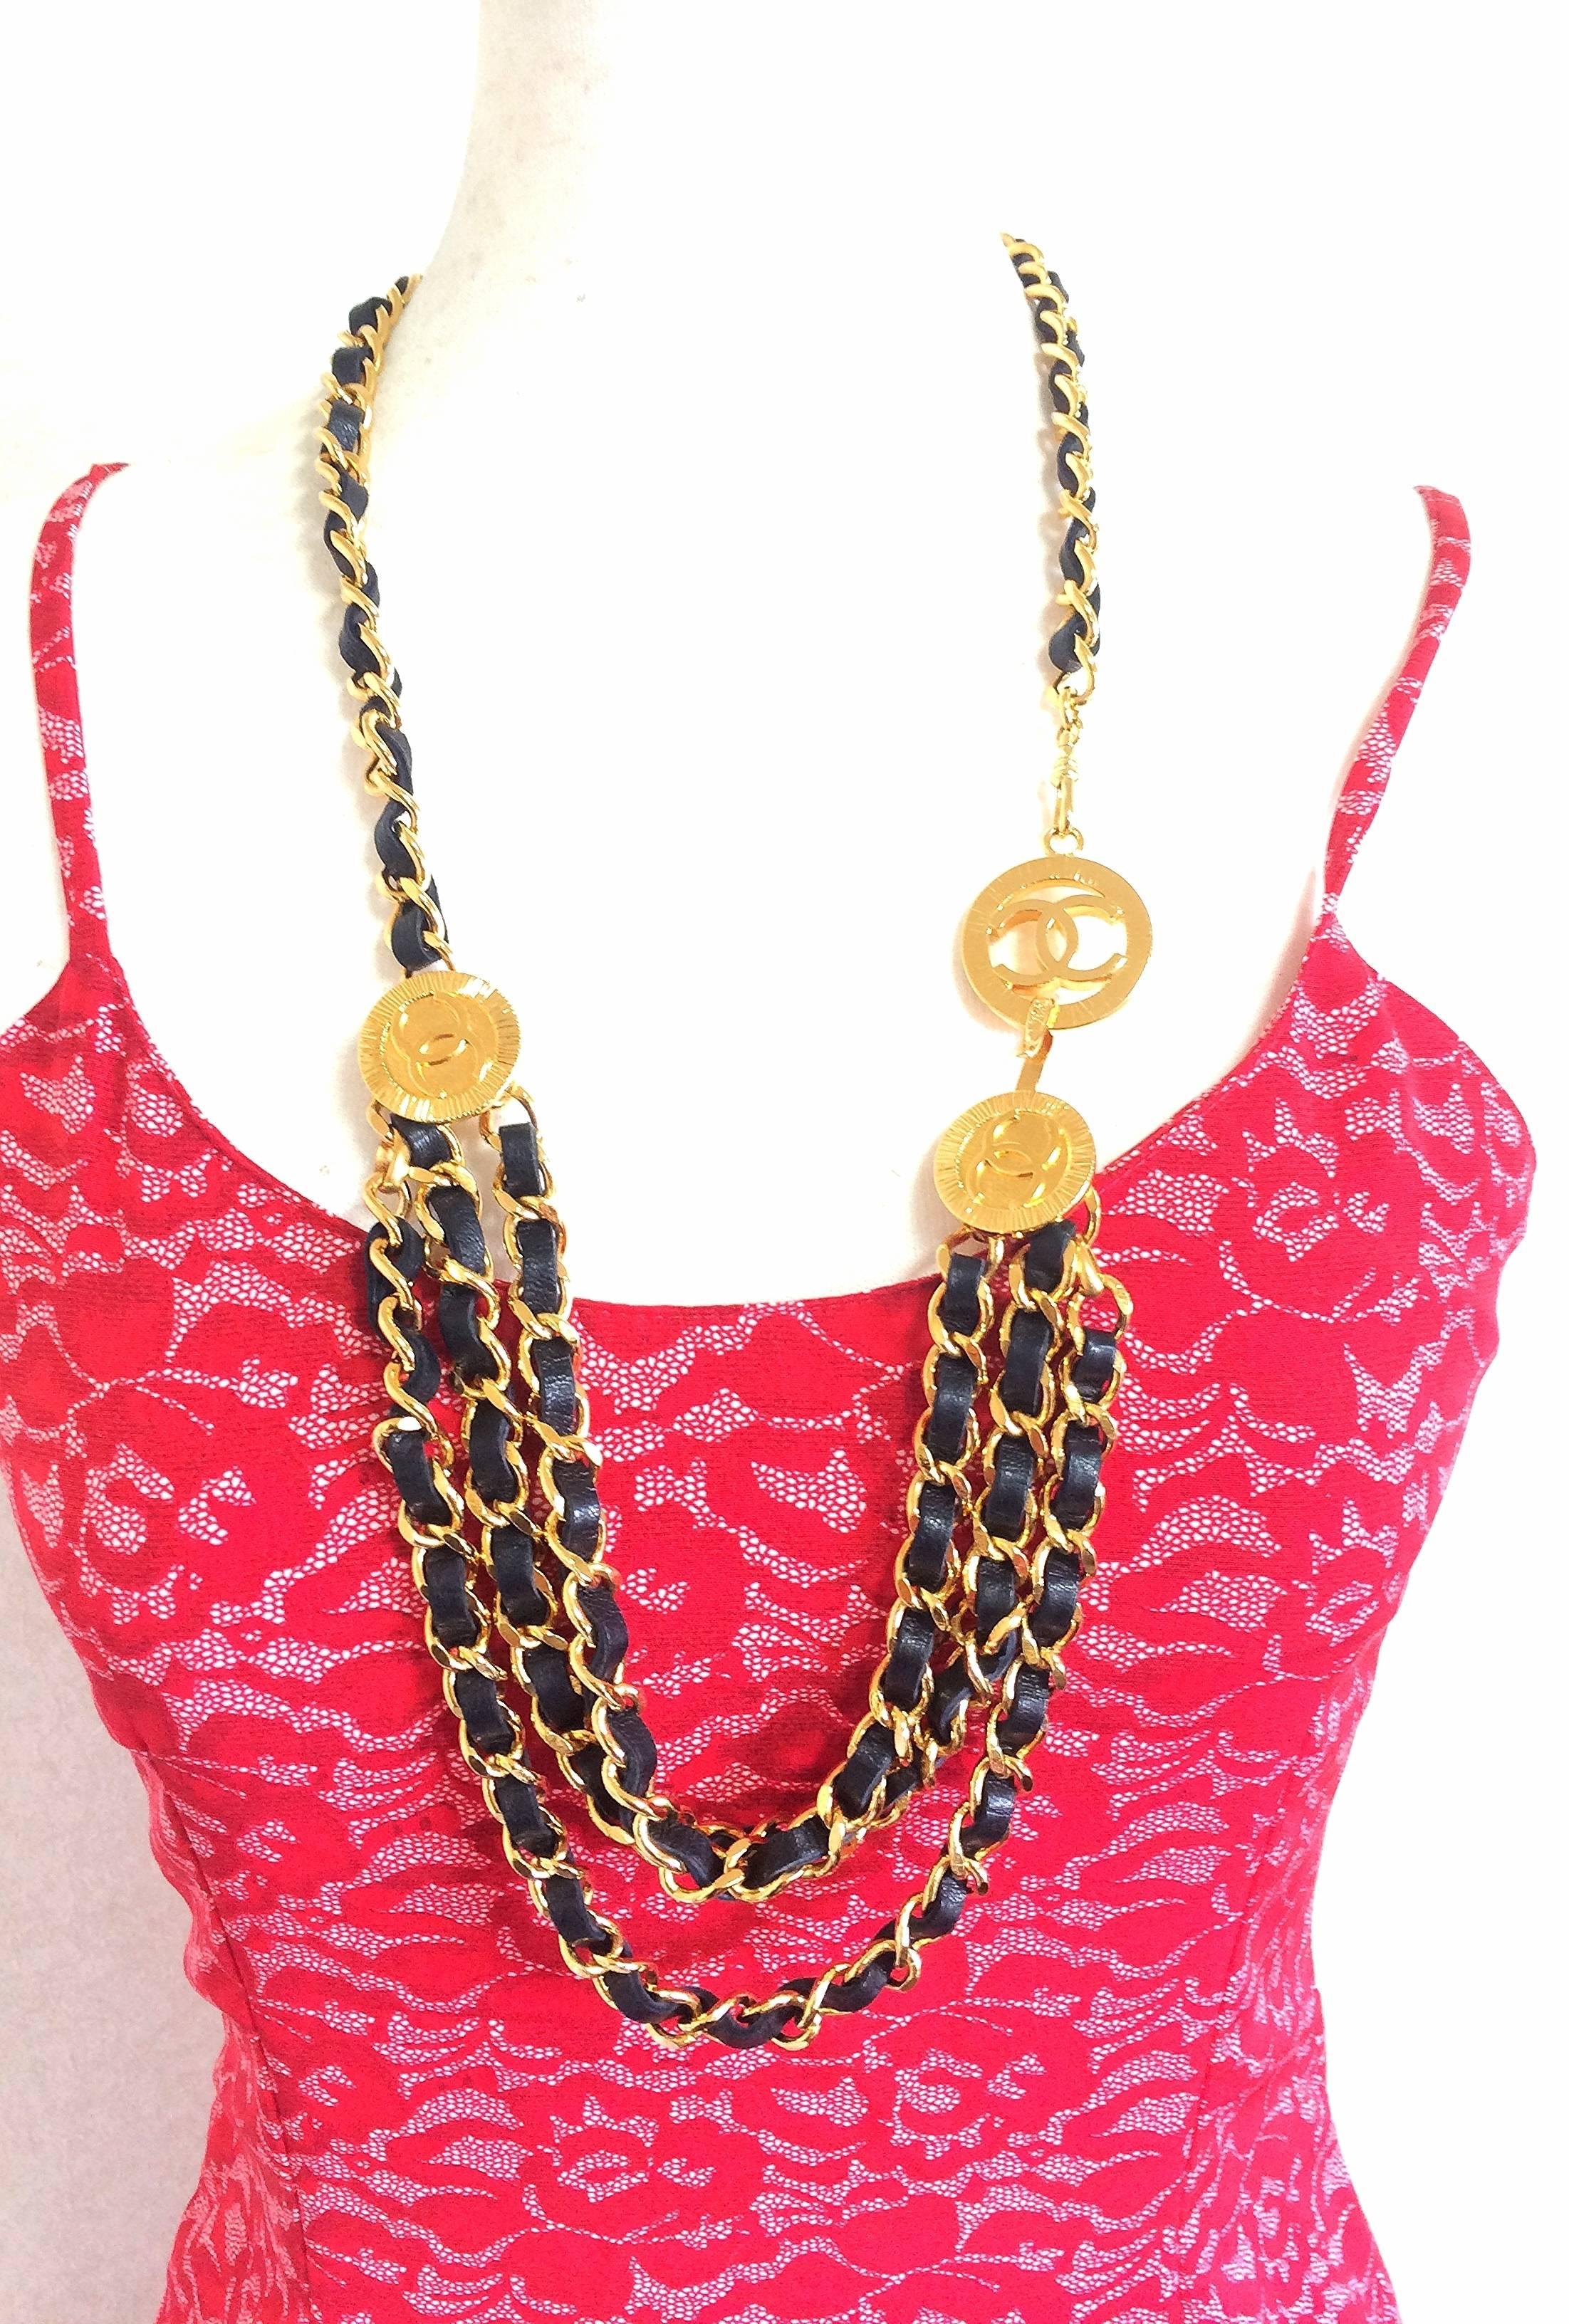 MINT. 1980's Vintage CHANEL 3 layered black leather and golden chain belt with golden CC charms. Can be necklace. Perfect CHANEL jewelry.

MINT, NEW condition!

Here is another fabulous piece from CHANEL back in the era of 80s with a stamp